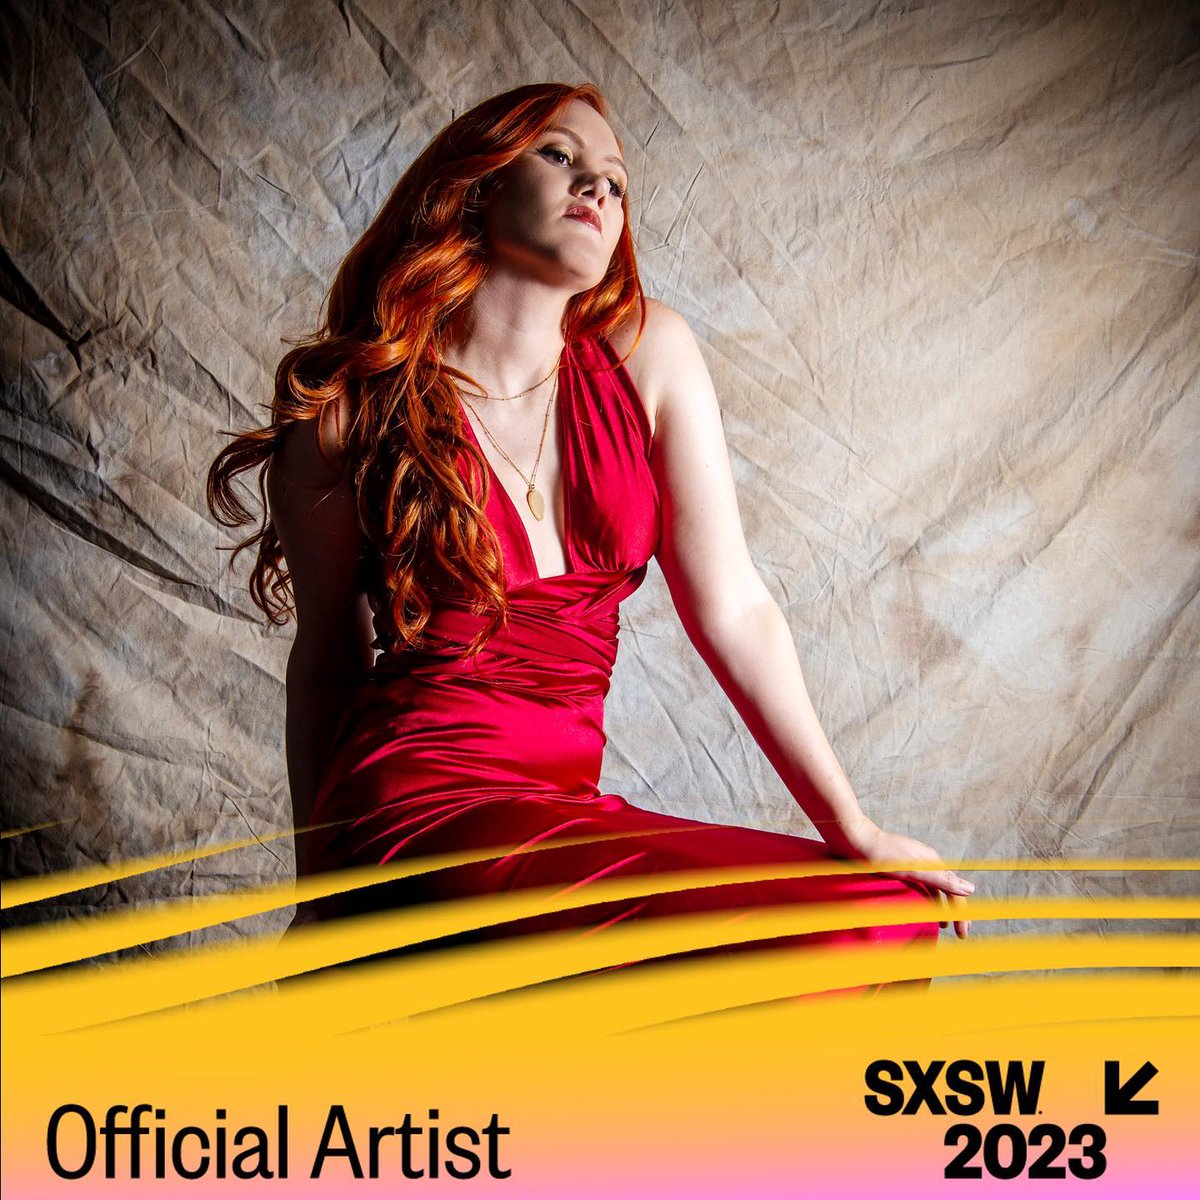 Who is heading to @sxsw this year? The fabulous @GracePettis is an official showcase artist! 🎶✨ schedule.sxsw.com/2023/artists/2…